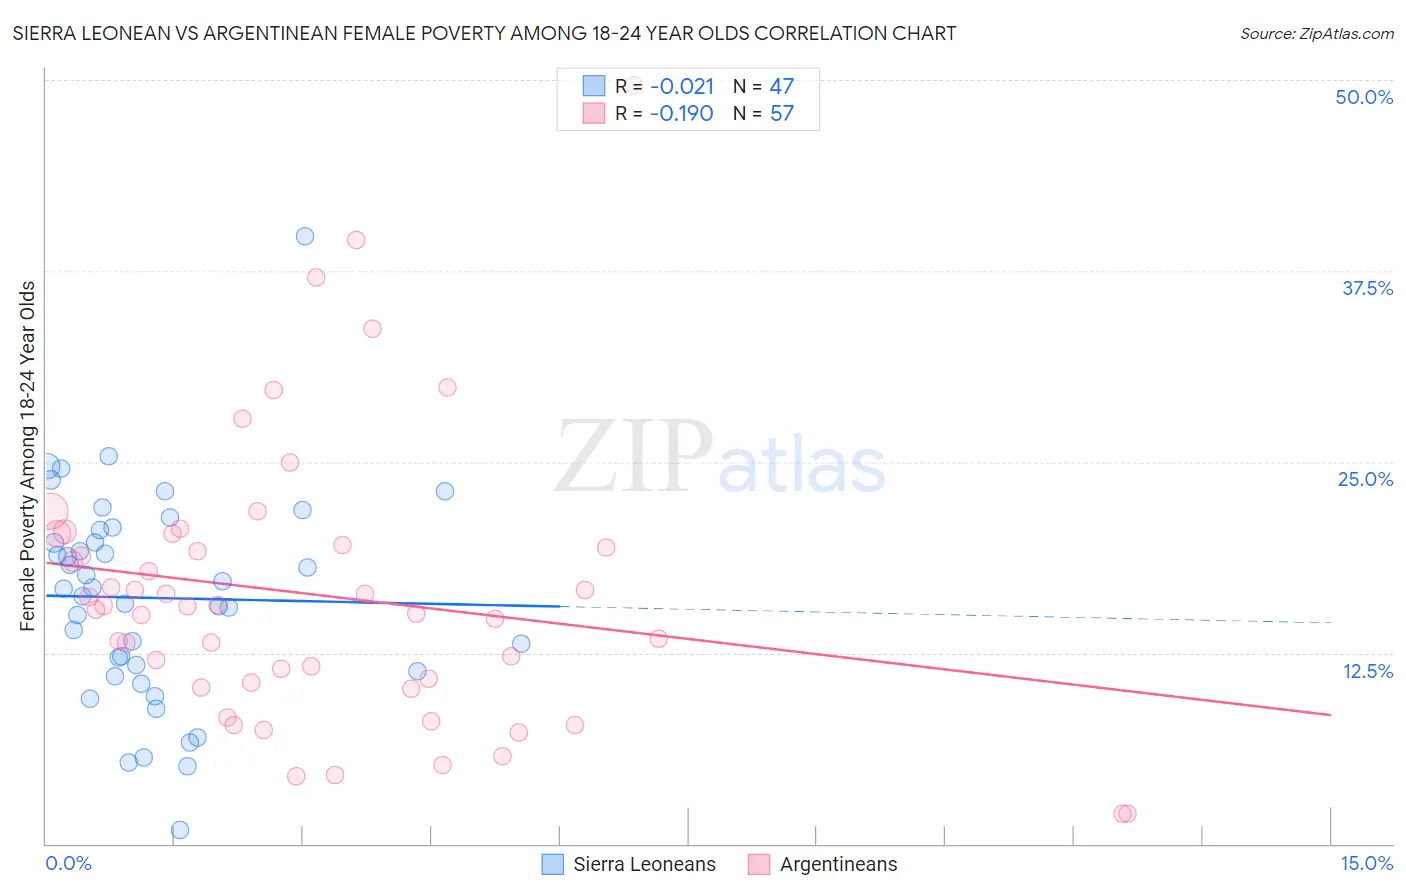 Sierra Leonean vs Argentinean Female Poverty Among 18-24 Year Olds